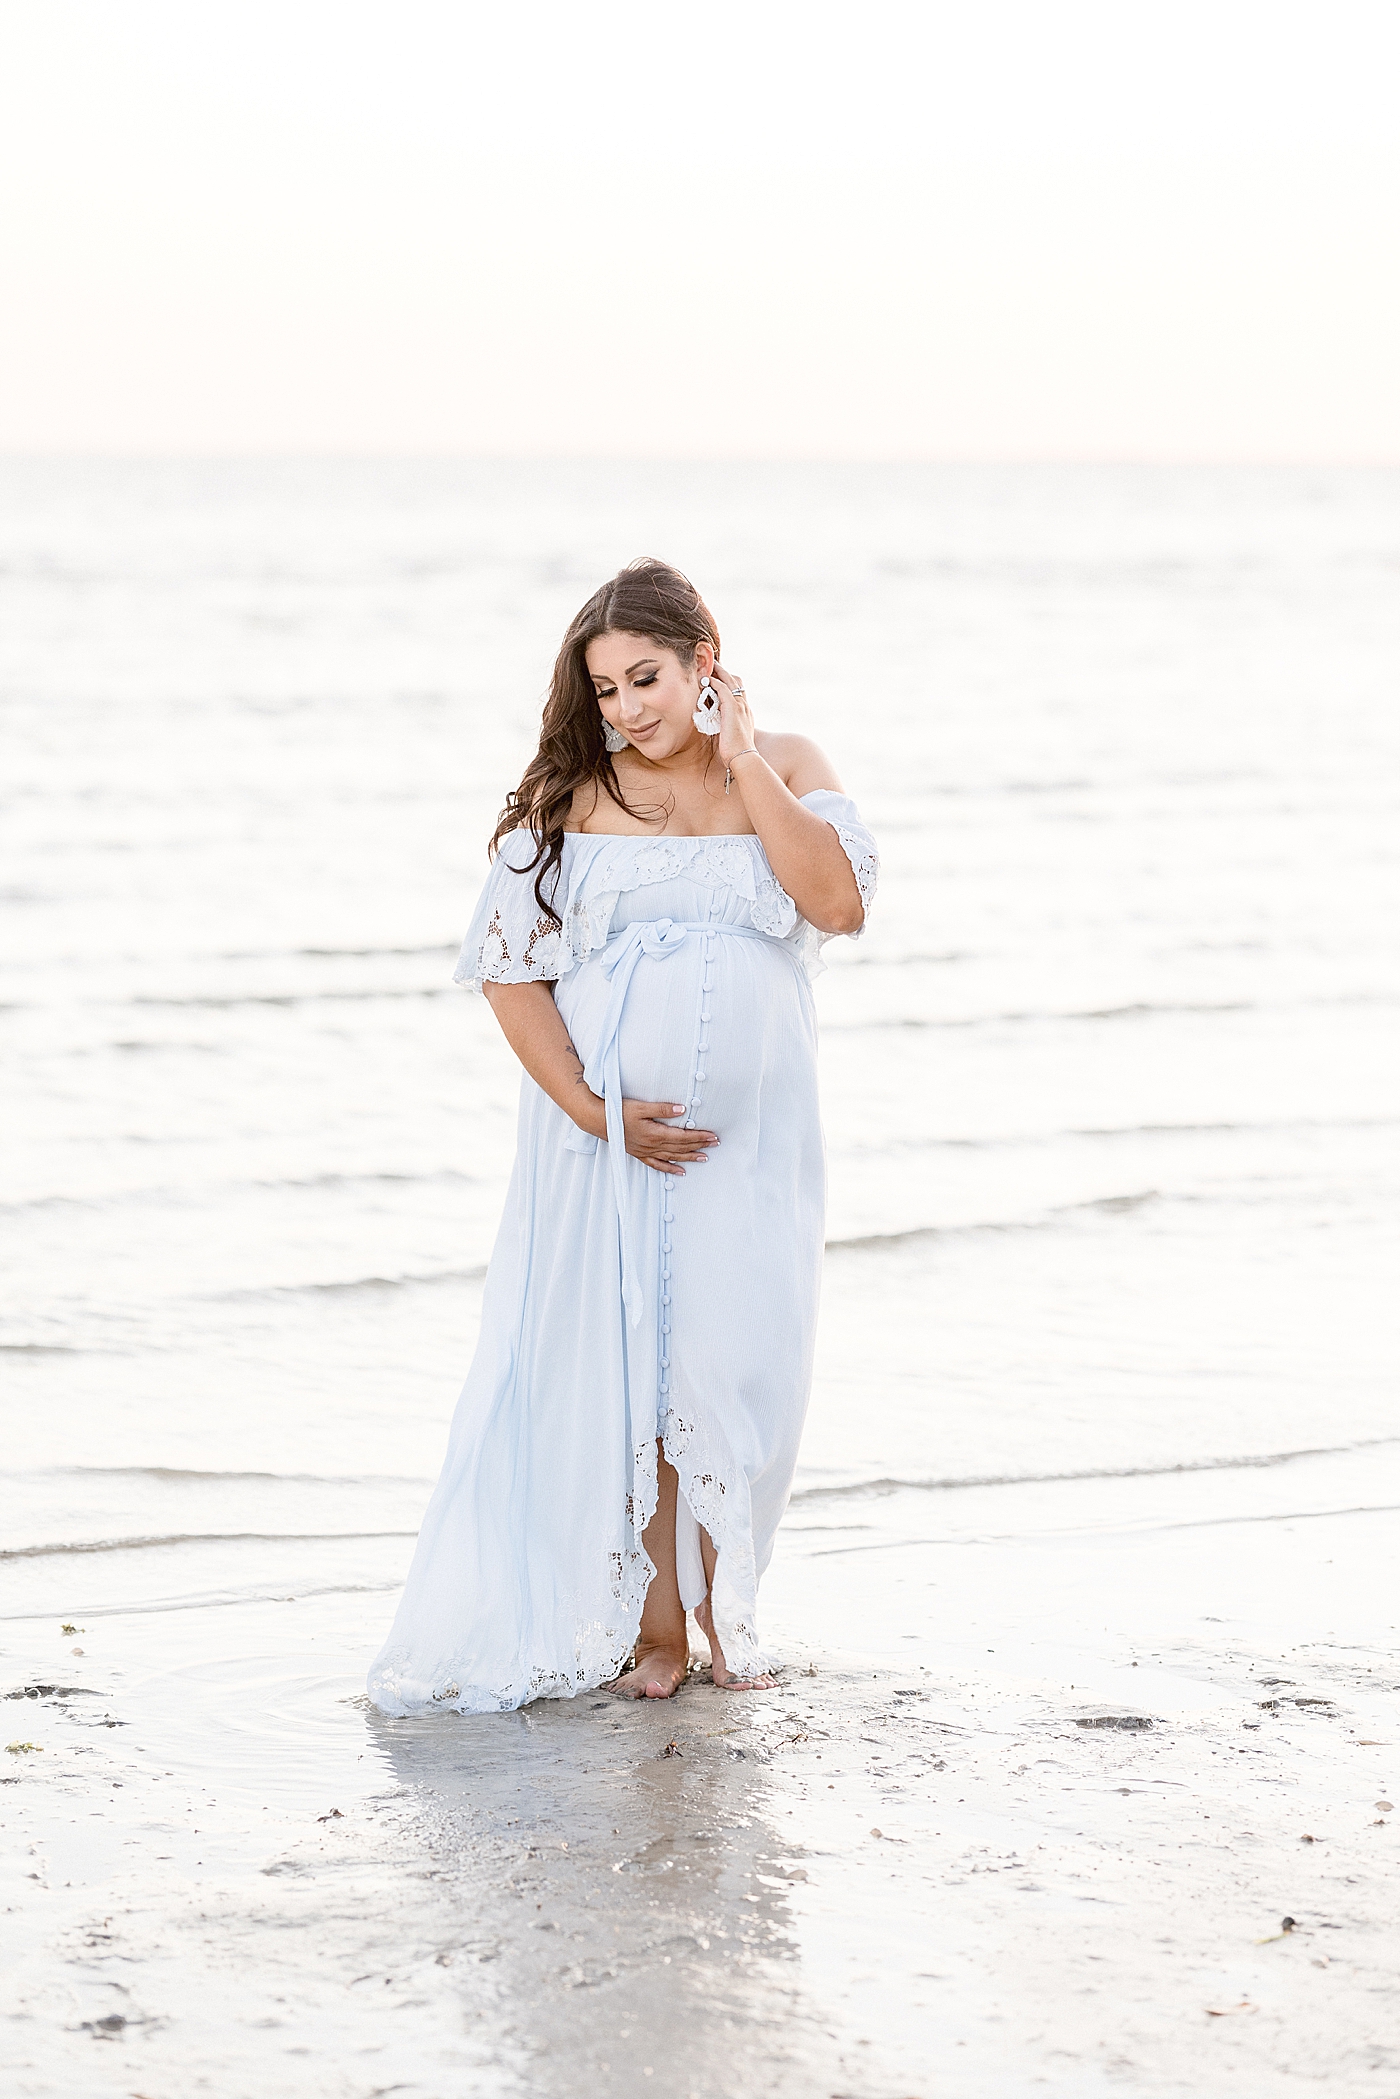 Sunset session for Mom wearing fillyboo maternity dress. Photo by Brittany Elise Photography.